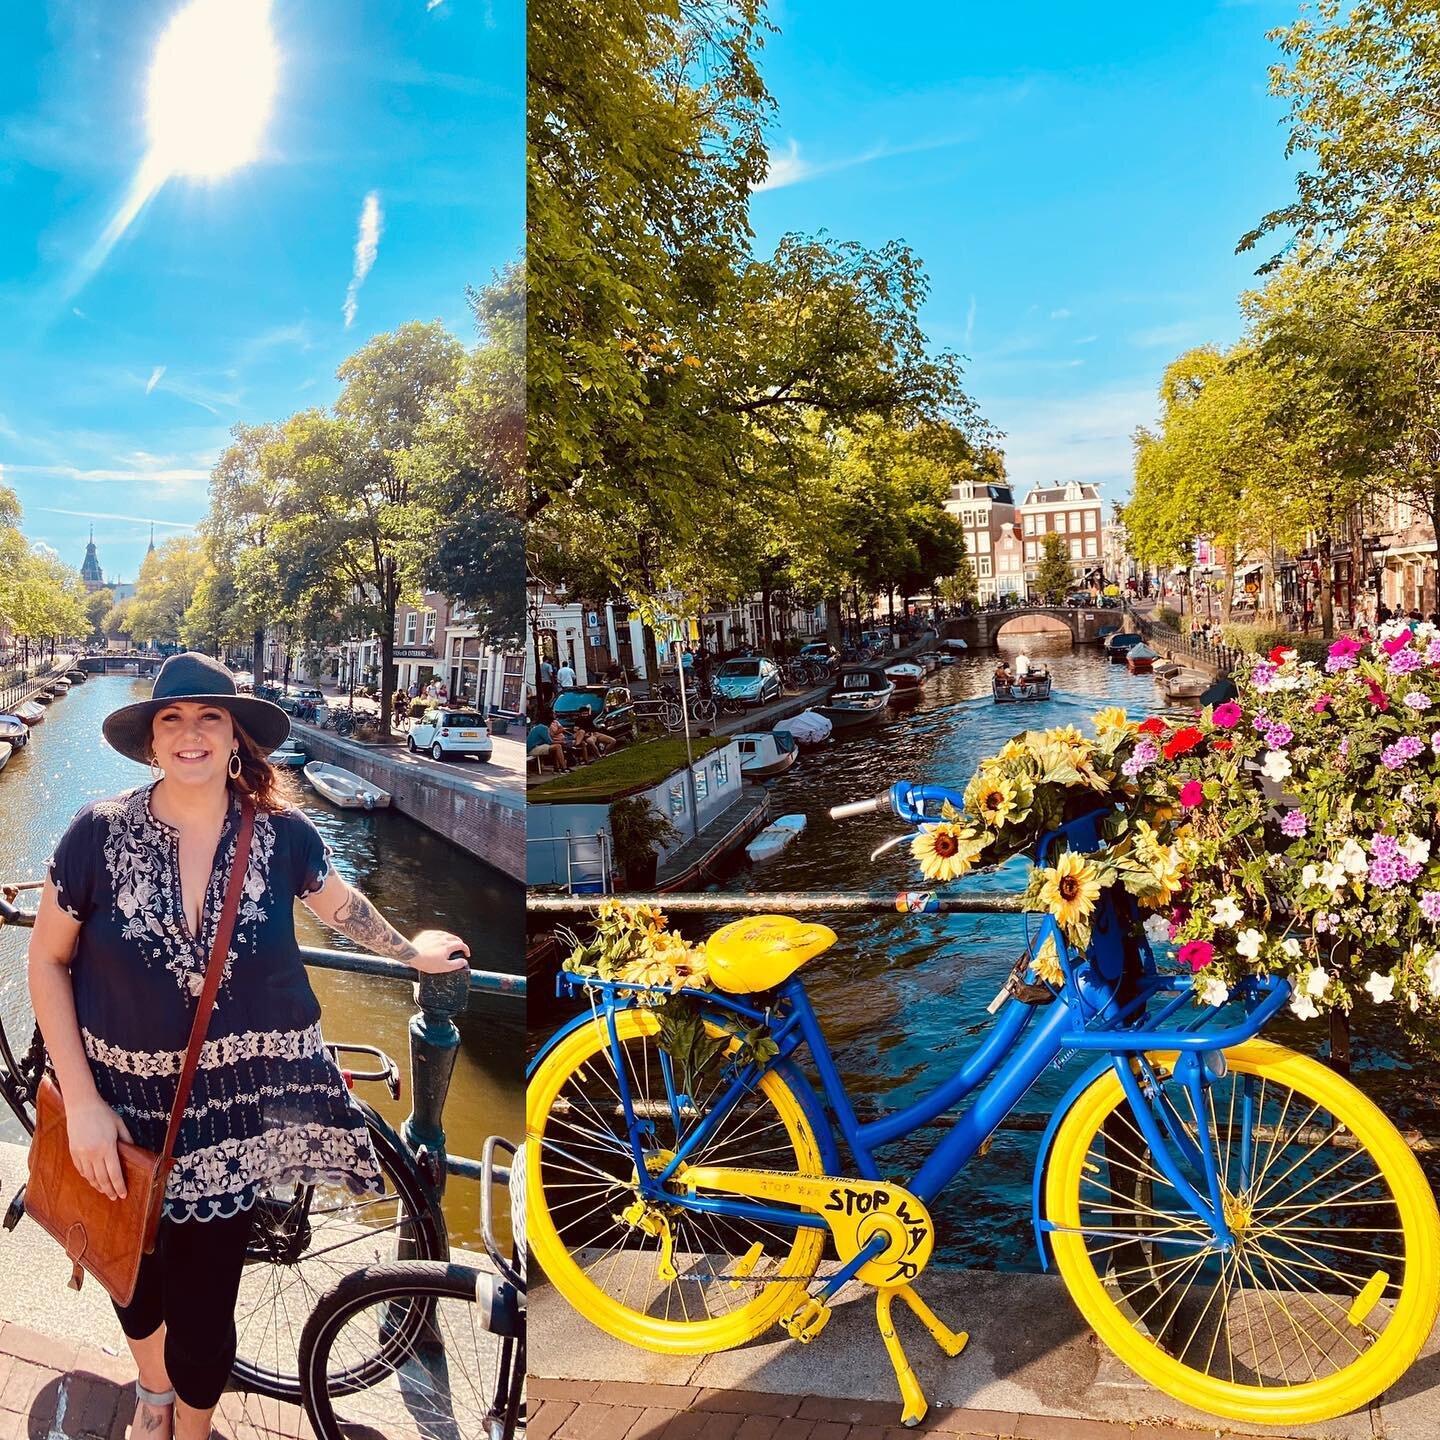 Amsterdam!! I love this city ❤️ We stopped over for a few days on our way to Morocco and we lucked out on beautiful weather. We had so much fun exploring the city! We shopped flea markets, went treasure hunting in antique shops, walked the historical